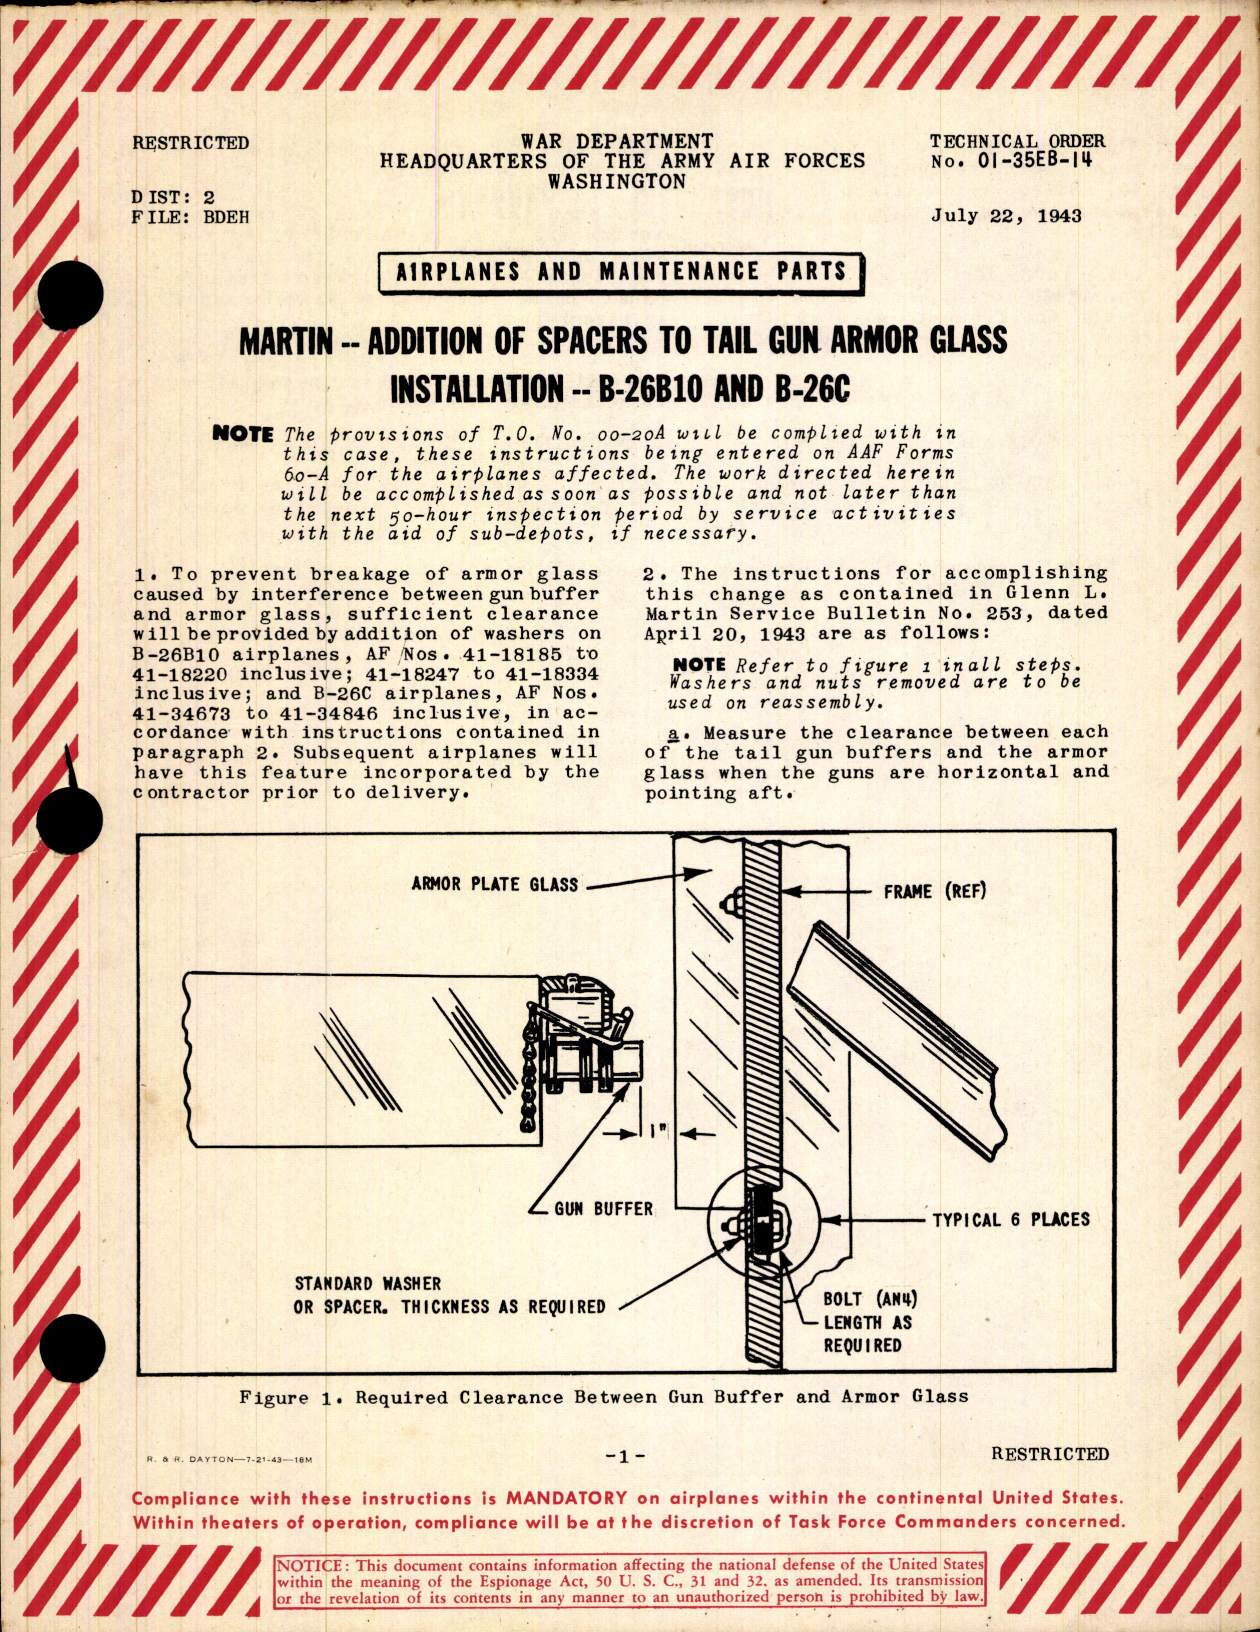 Sample page 1 from AirCorps Library document: Addition of Spacers to the Tail Gun Armor Glass Installation for B-26B10 and B-26C